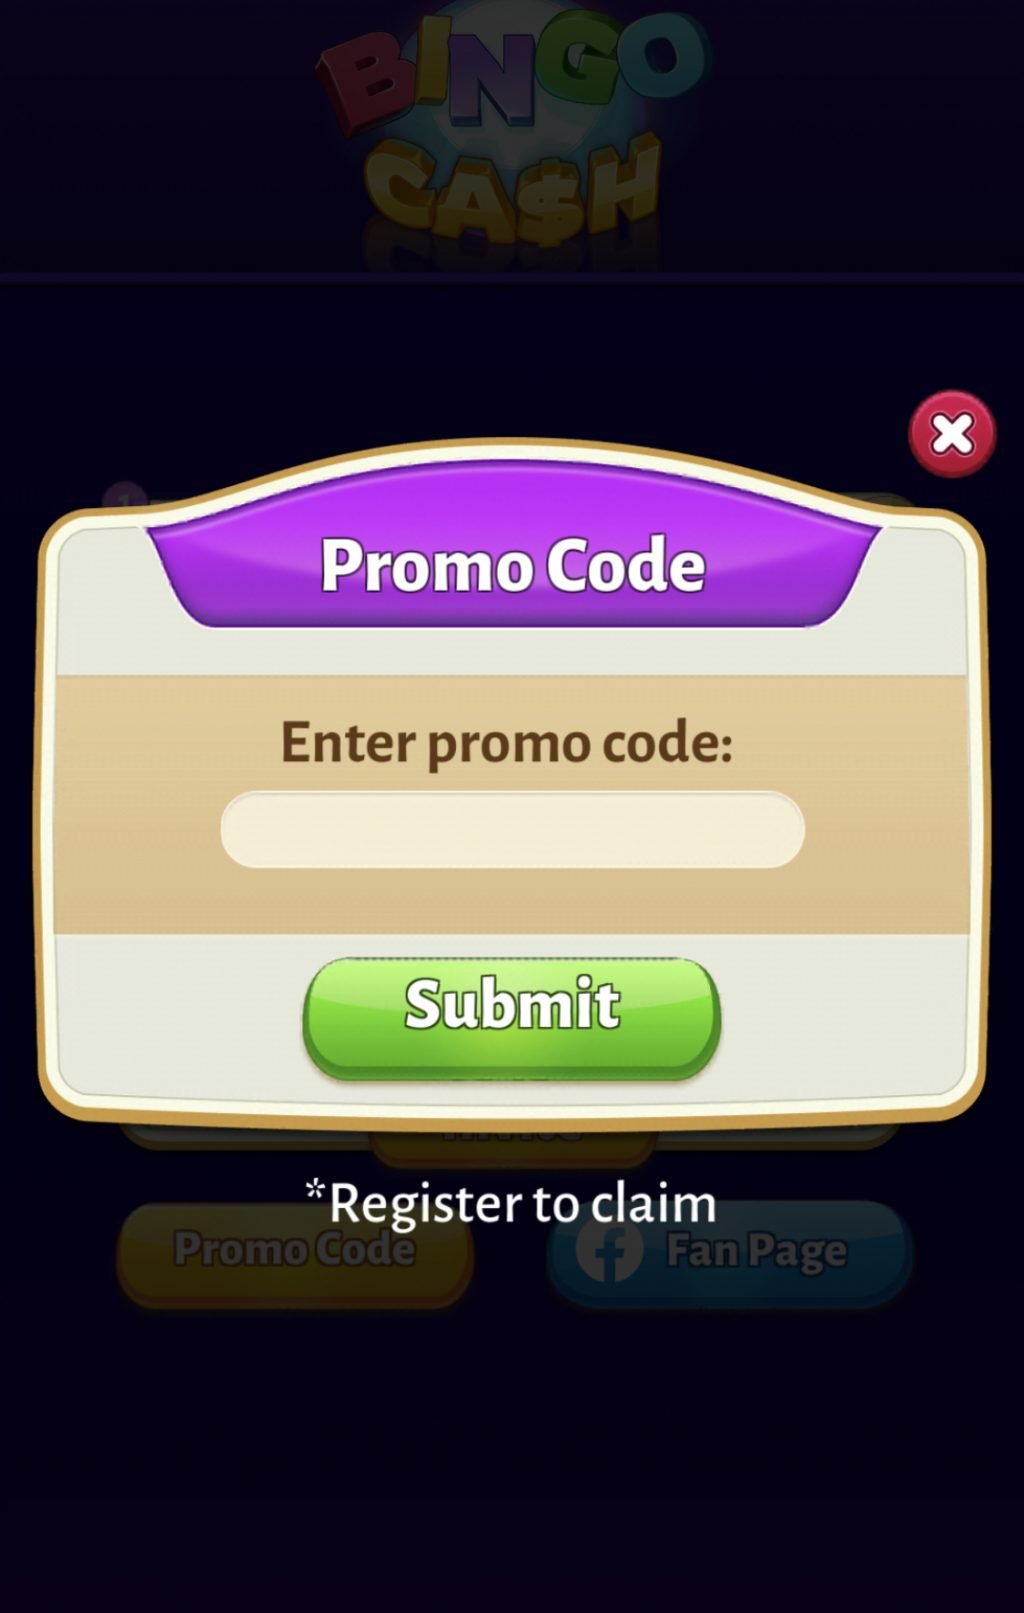 Bingo Cash - List of Promo Codes and How To Find More of Them - WP ...